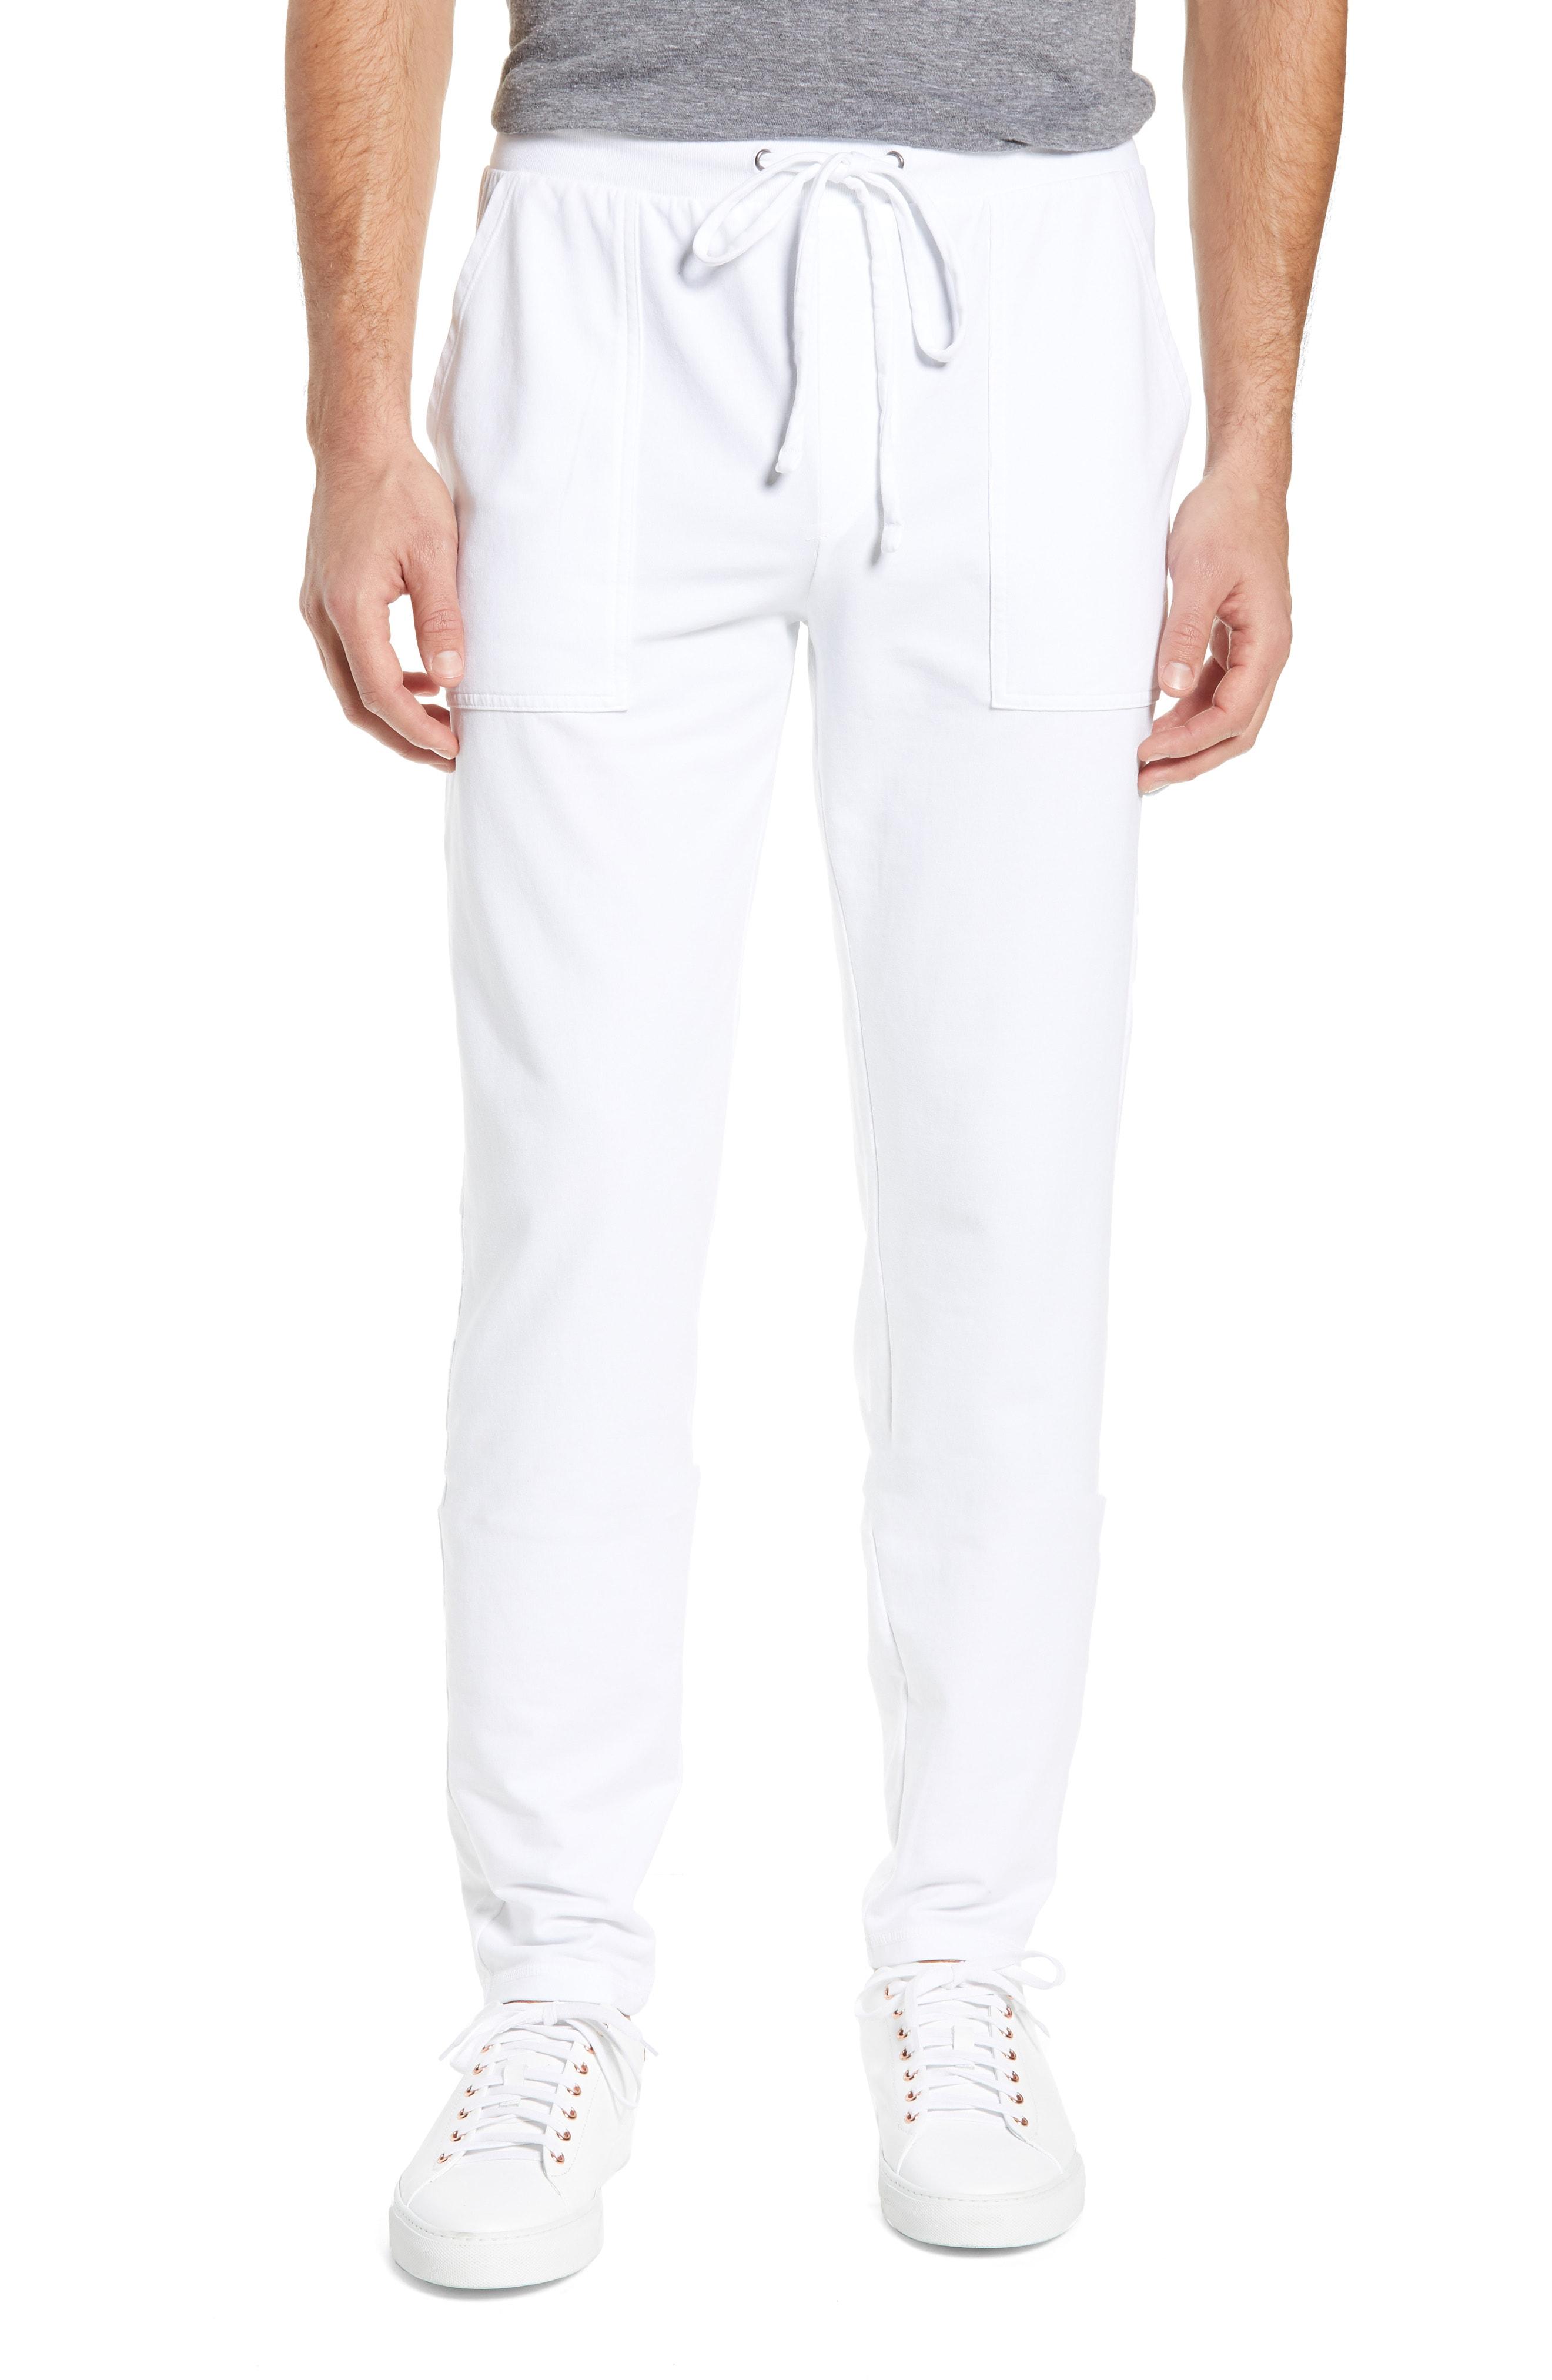 Lyst - Goodlife Slim Fit Micro Terry Sweatpants in White for Men